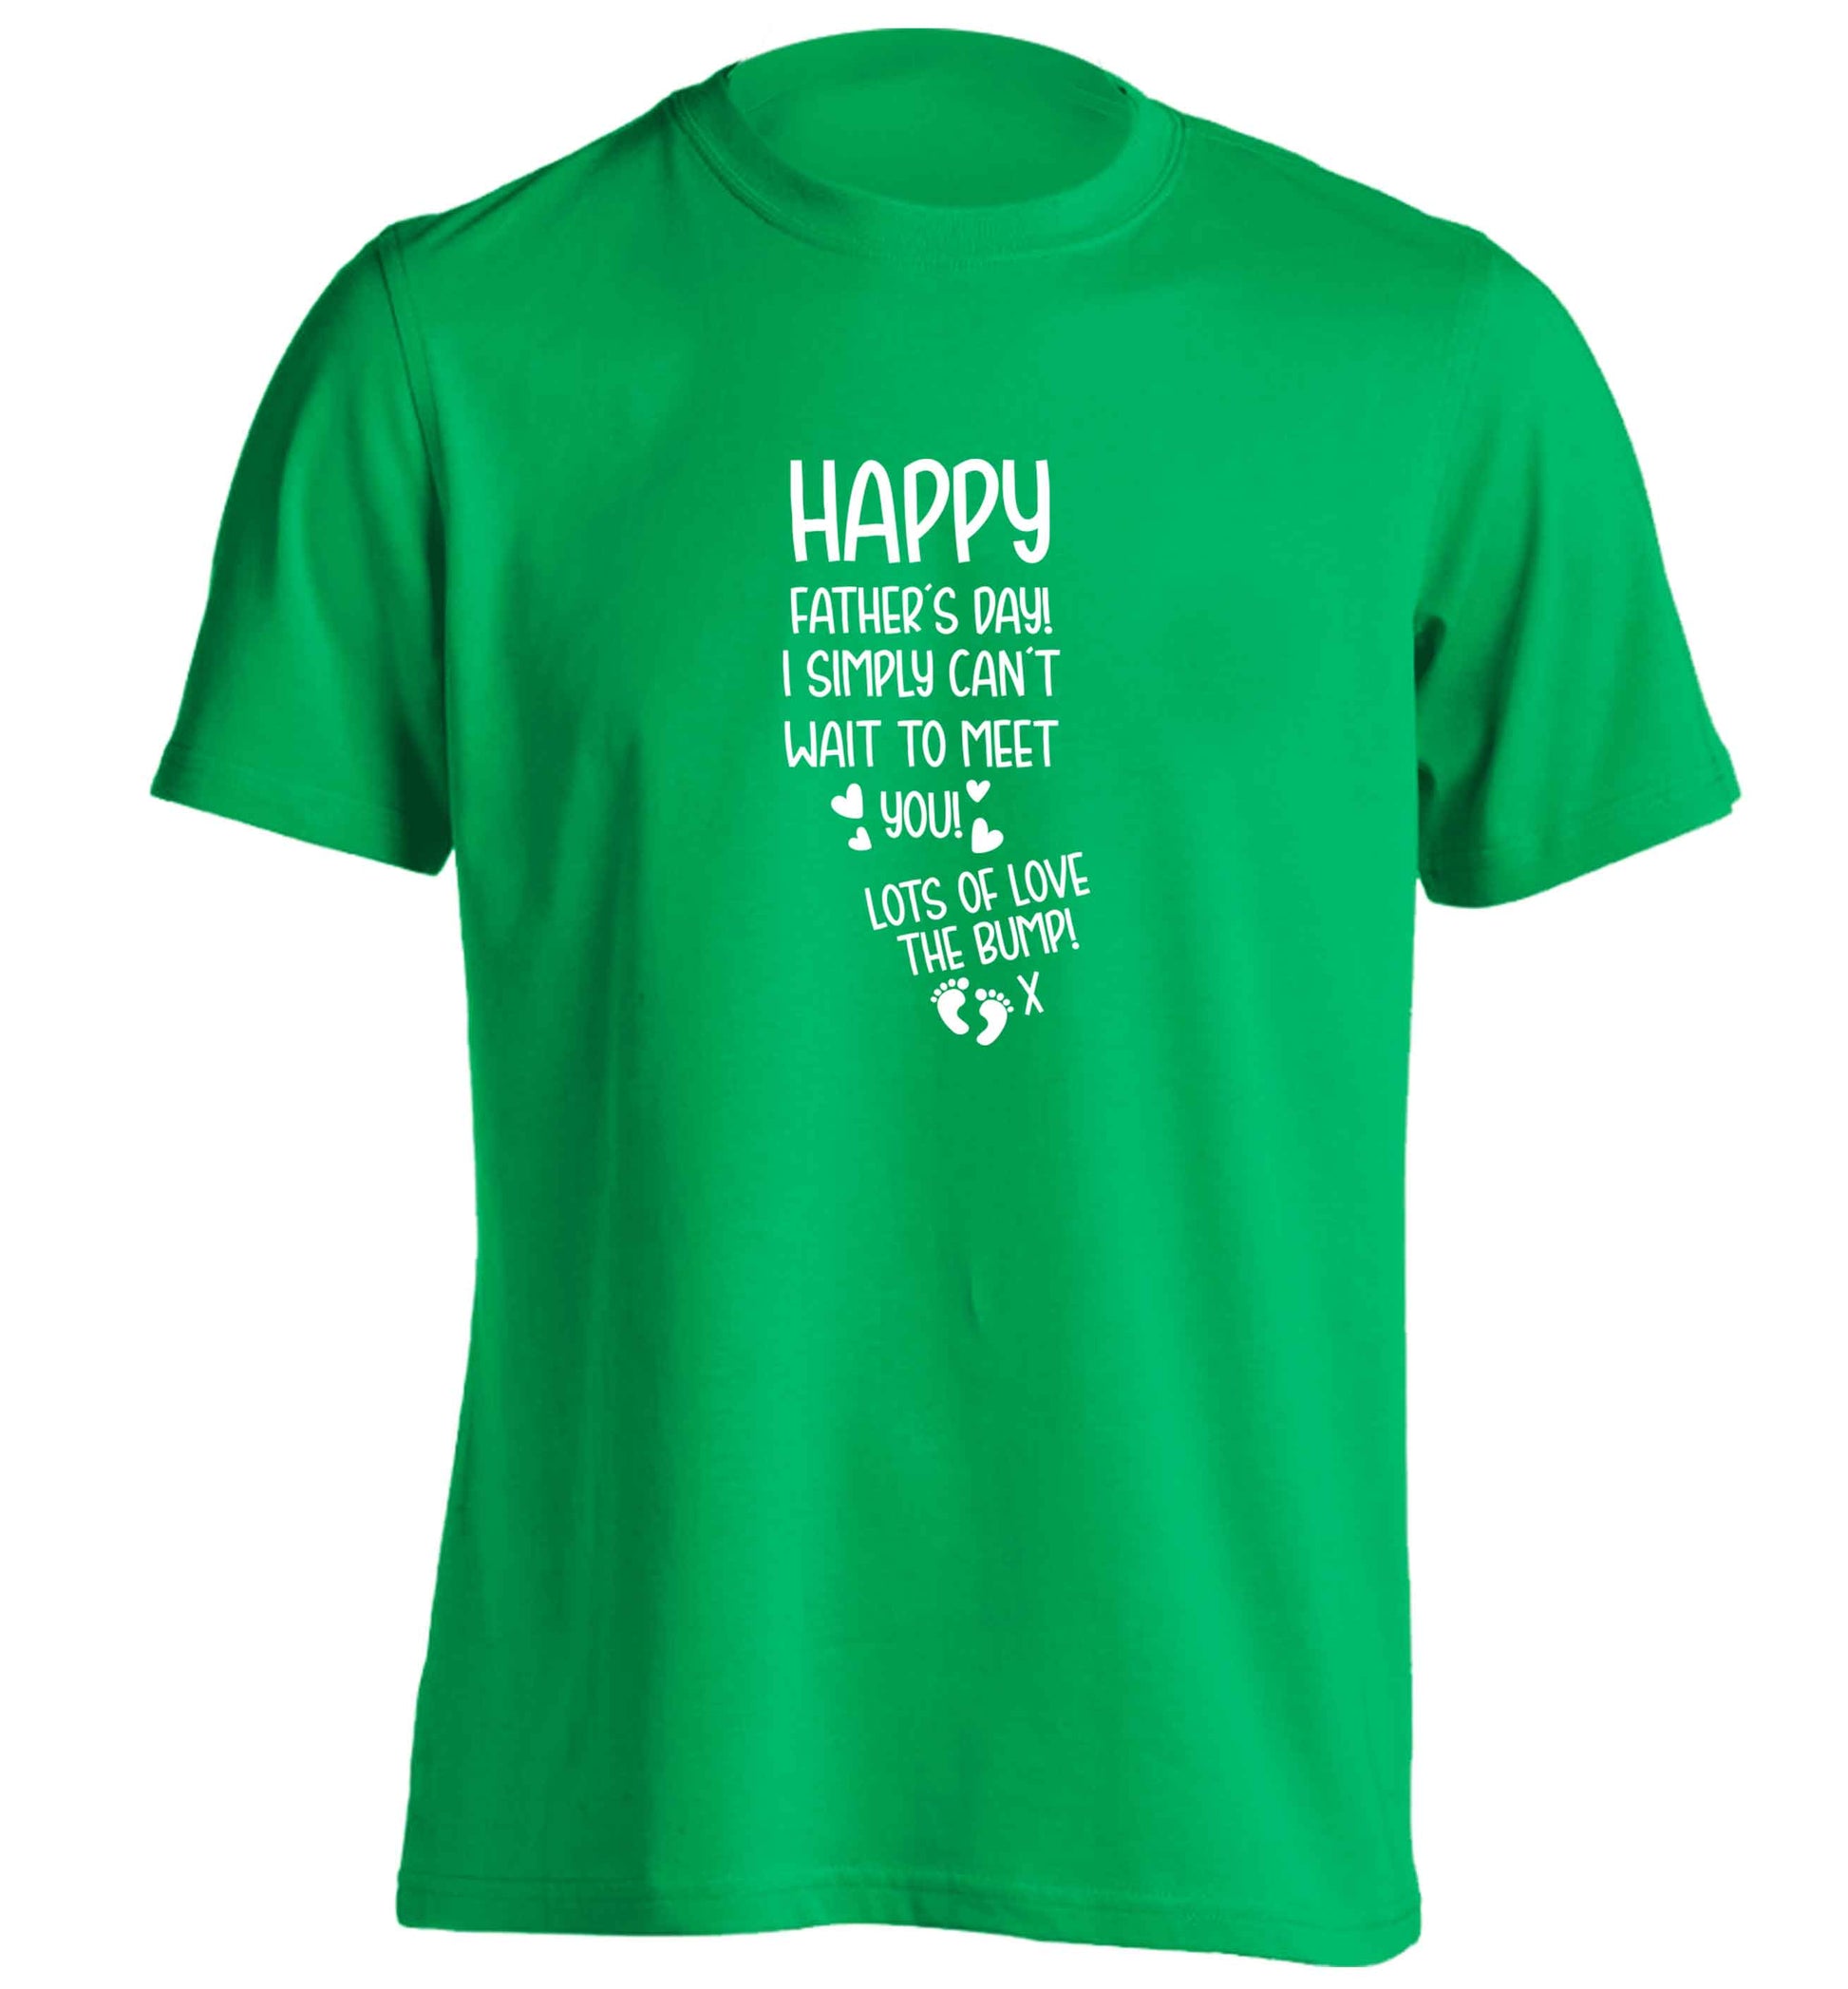 Happy Father's day daddy I can't wait to meet you lot's of love the bump! adults unisex green Tshirt 2XL